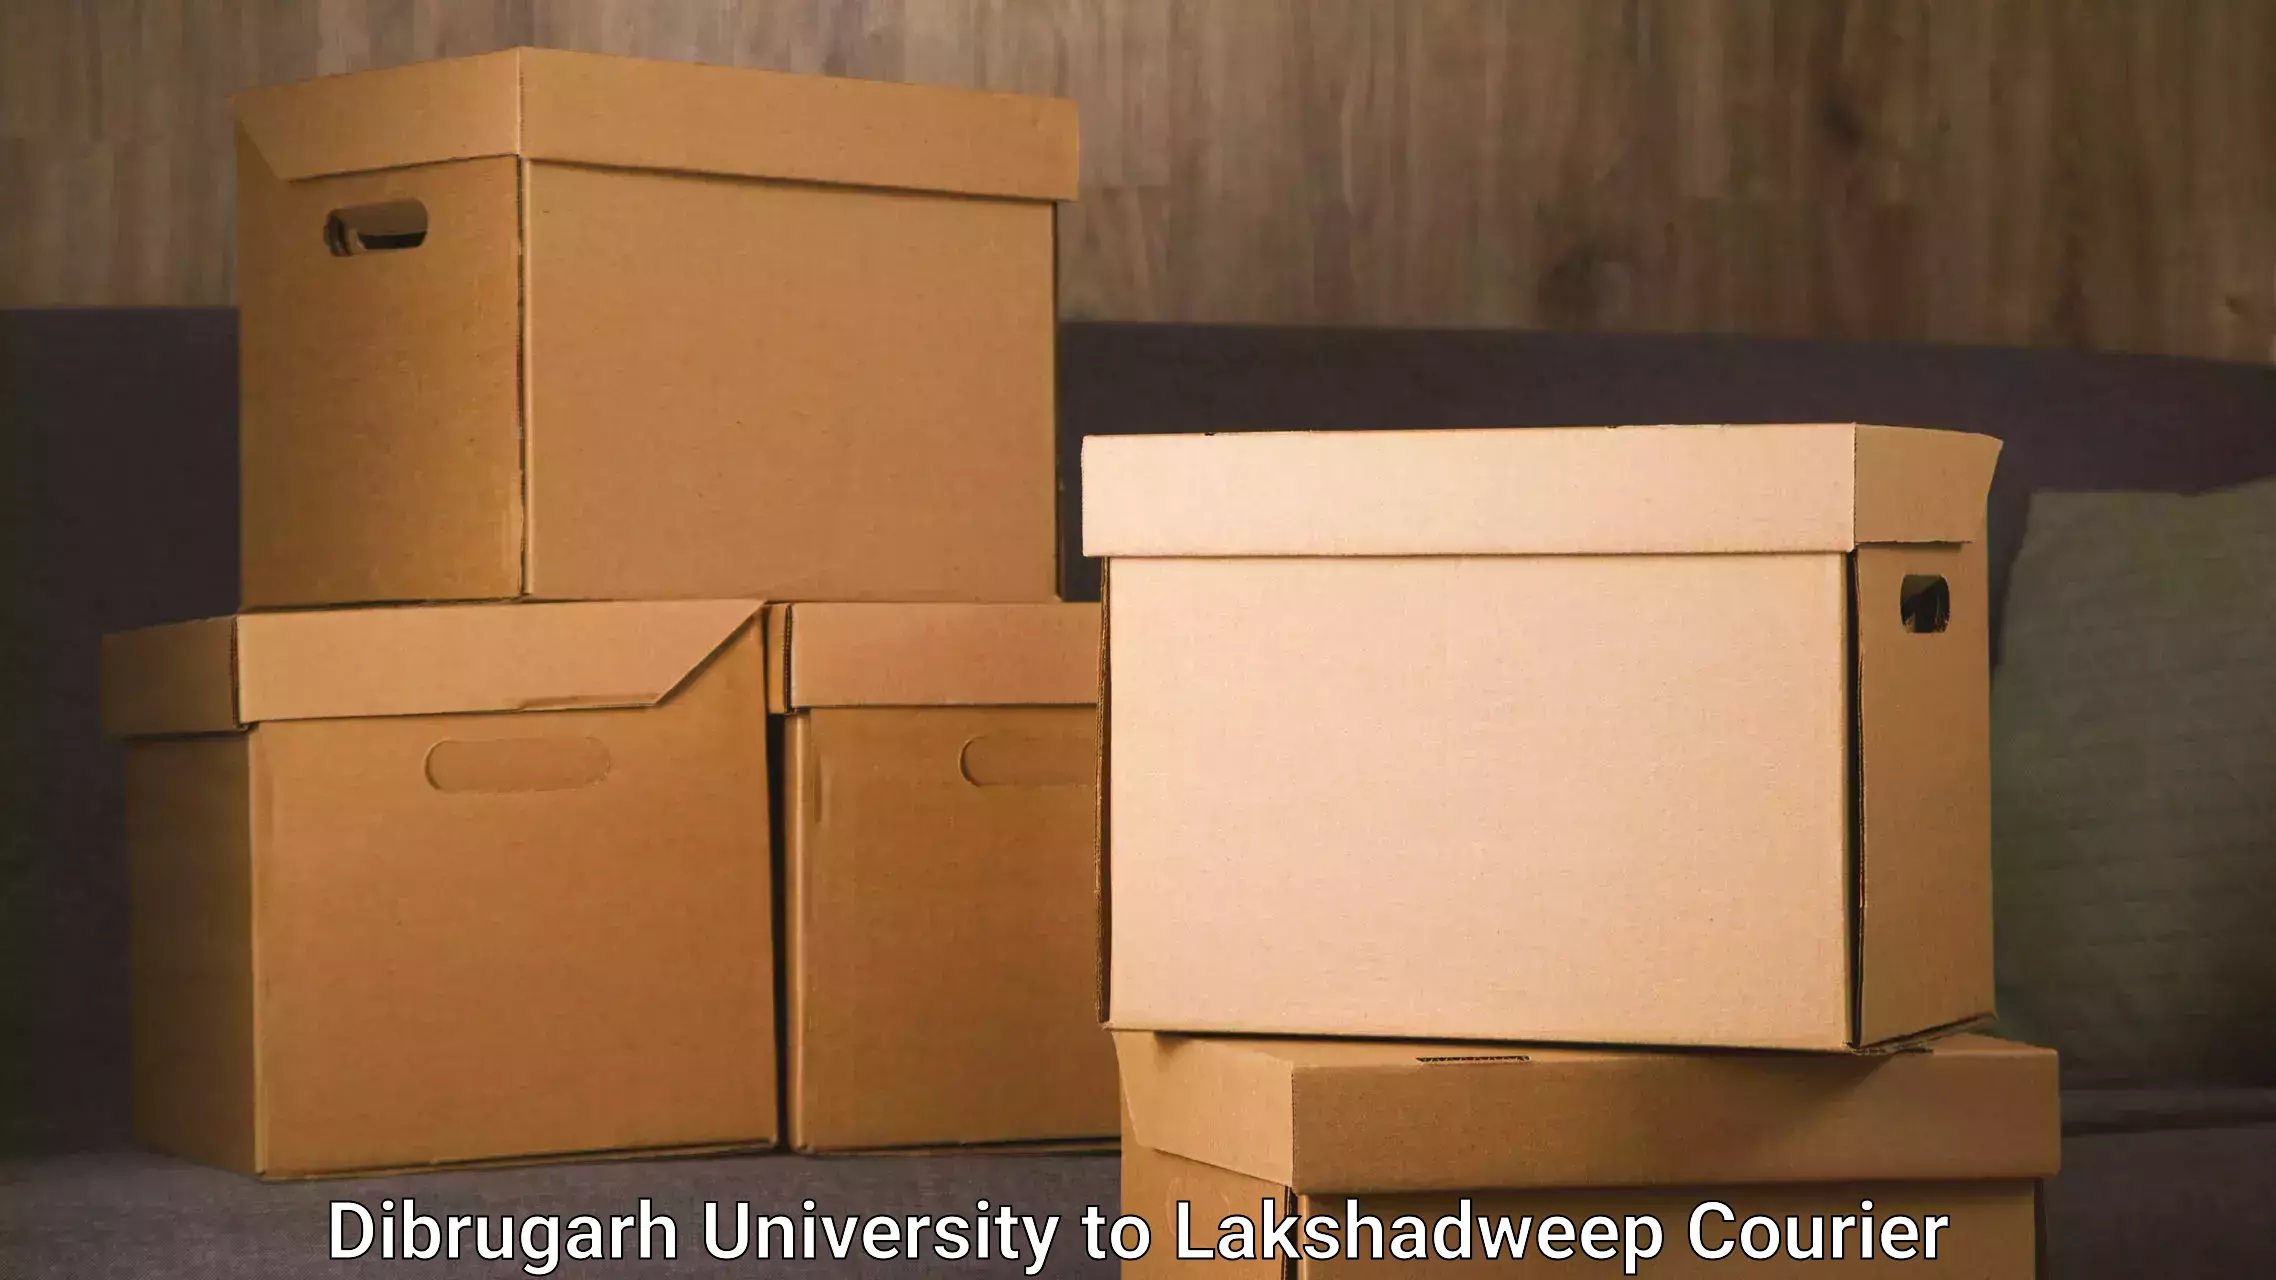 Courier service booking in Dibrugarh University to Lakshadweep